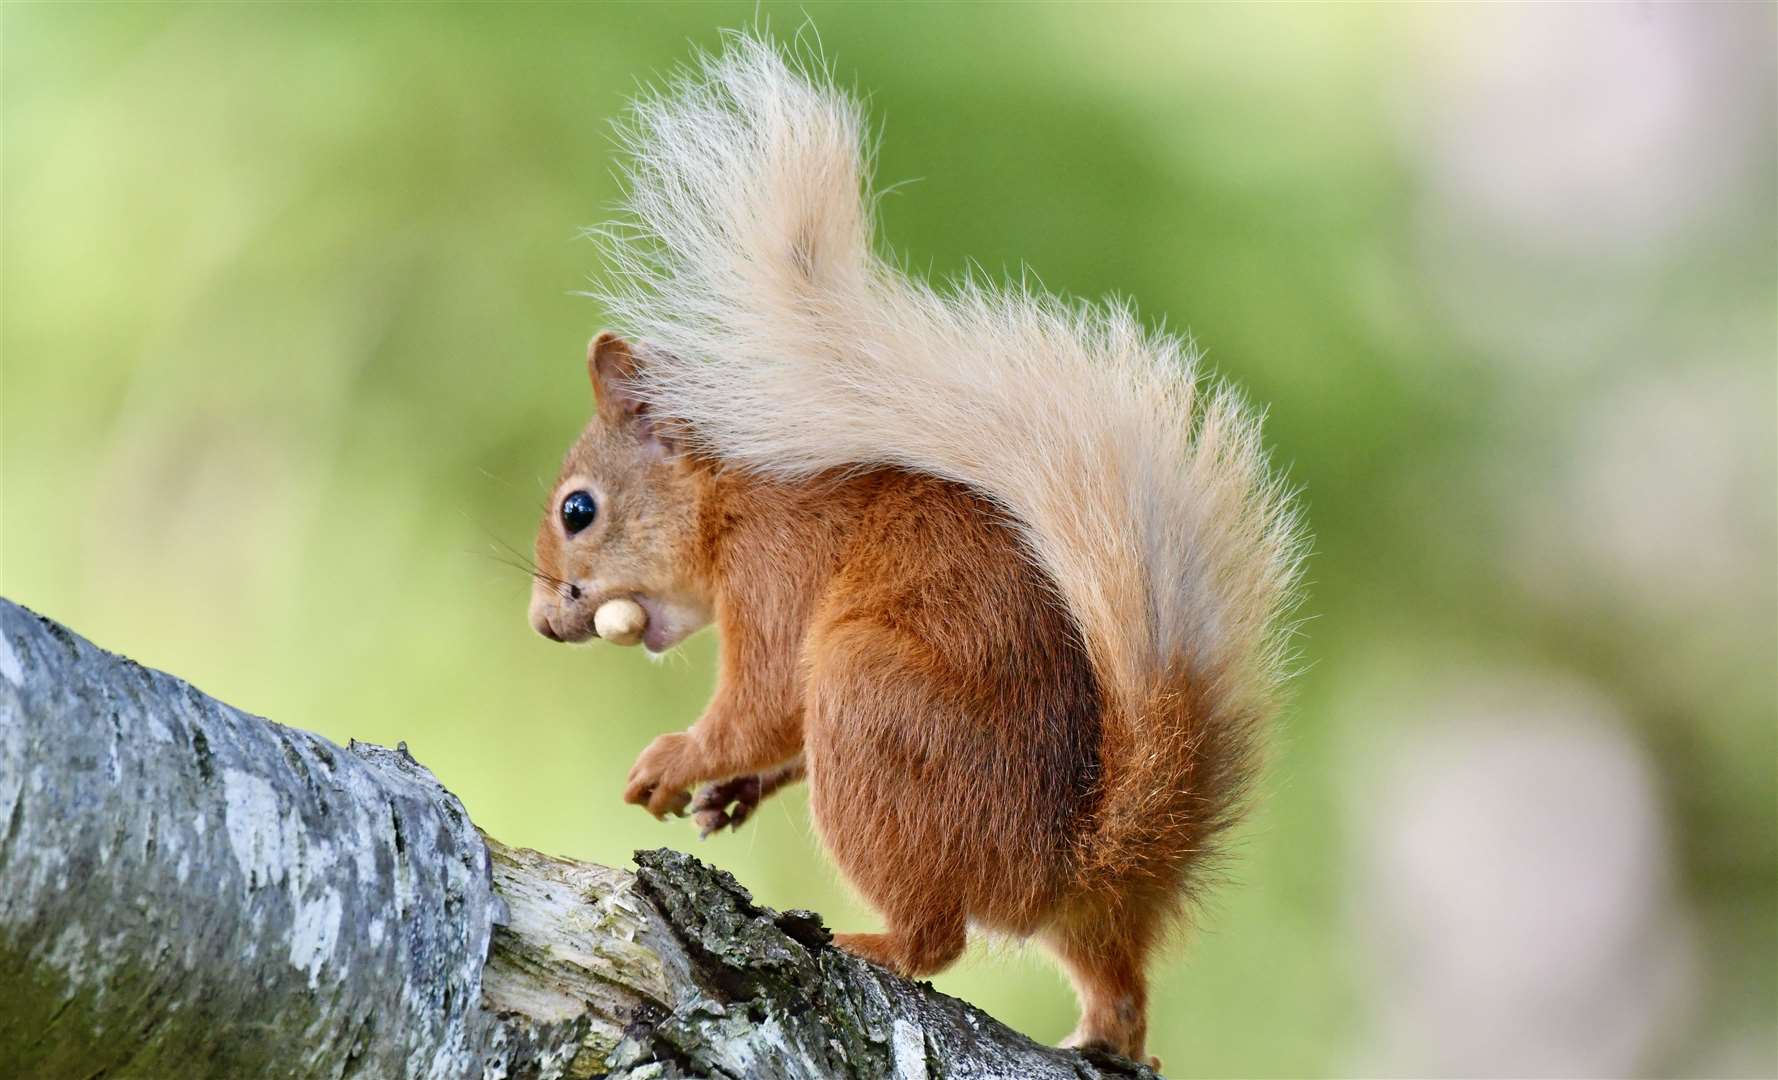 Hazel Thomson snapped this picture of a squirrel in Spynie Woods.